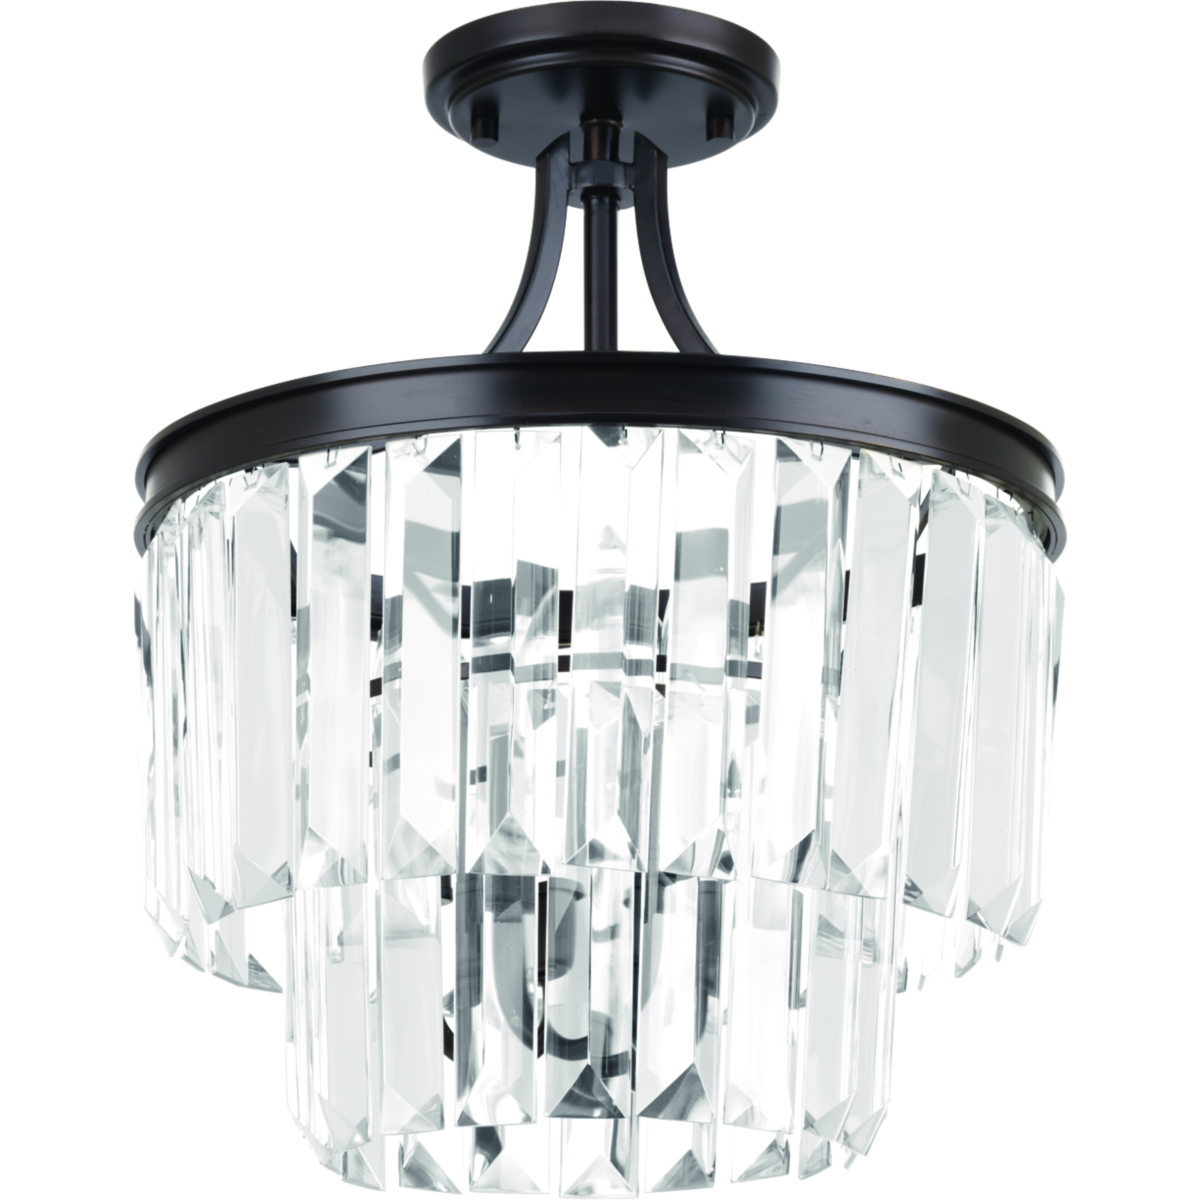 Glimmer fits the definition of livable luxury with elements that sparkle to create an instant statement within the home. Prismatic glass three-light pendants are supported by an architecturally- styled frame in Antique Bronze finish. The cascade of faceted linear glass deliver a sleek silhouette to any room. This versatile 15-1/2 in round fixture can also be mounted as a semi-flush.